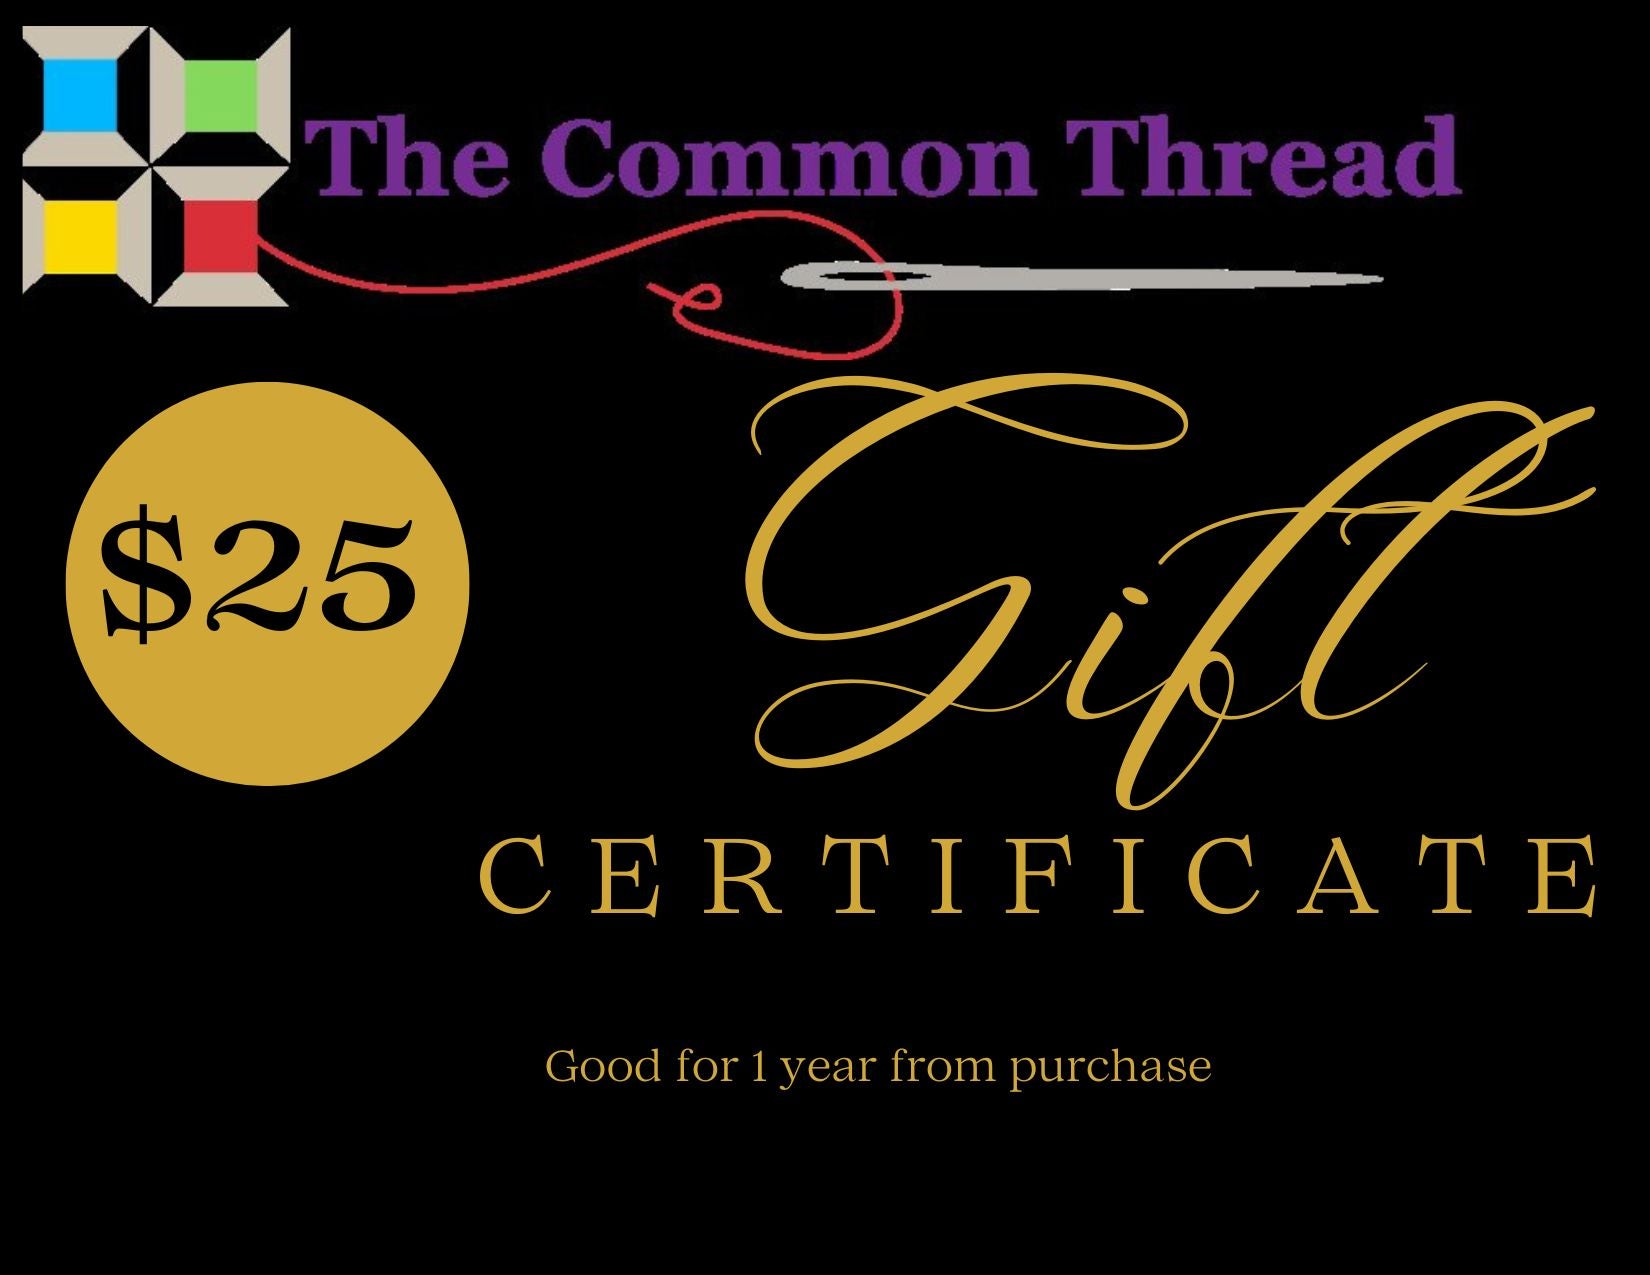 $25 GIFT CERTIFICATE FOR IN STORE USE ONLY